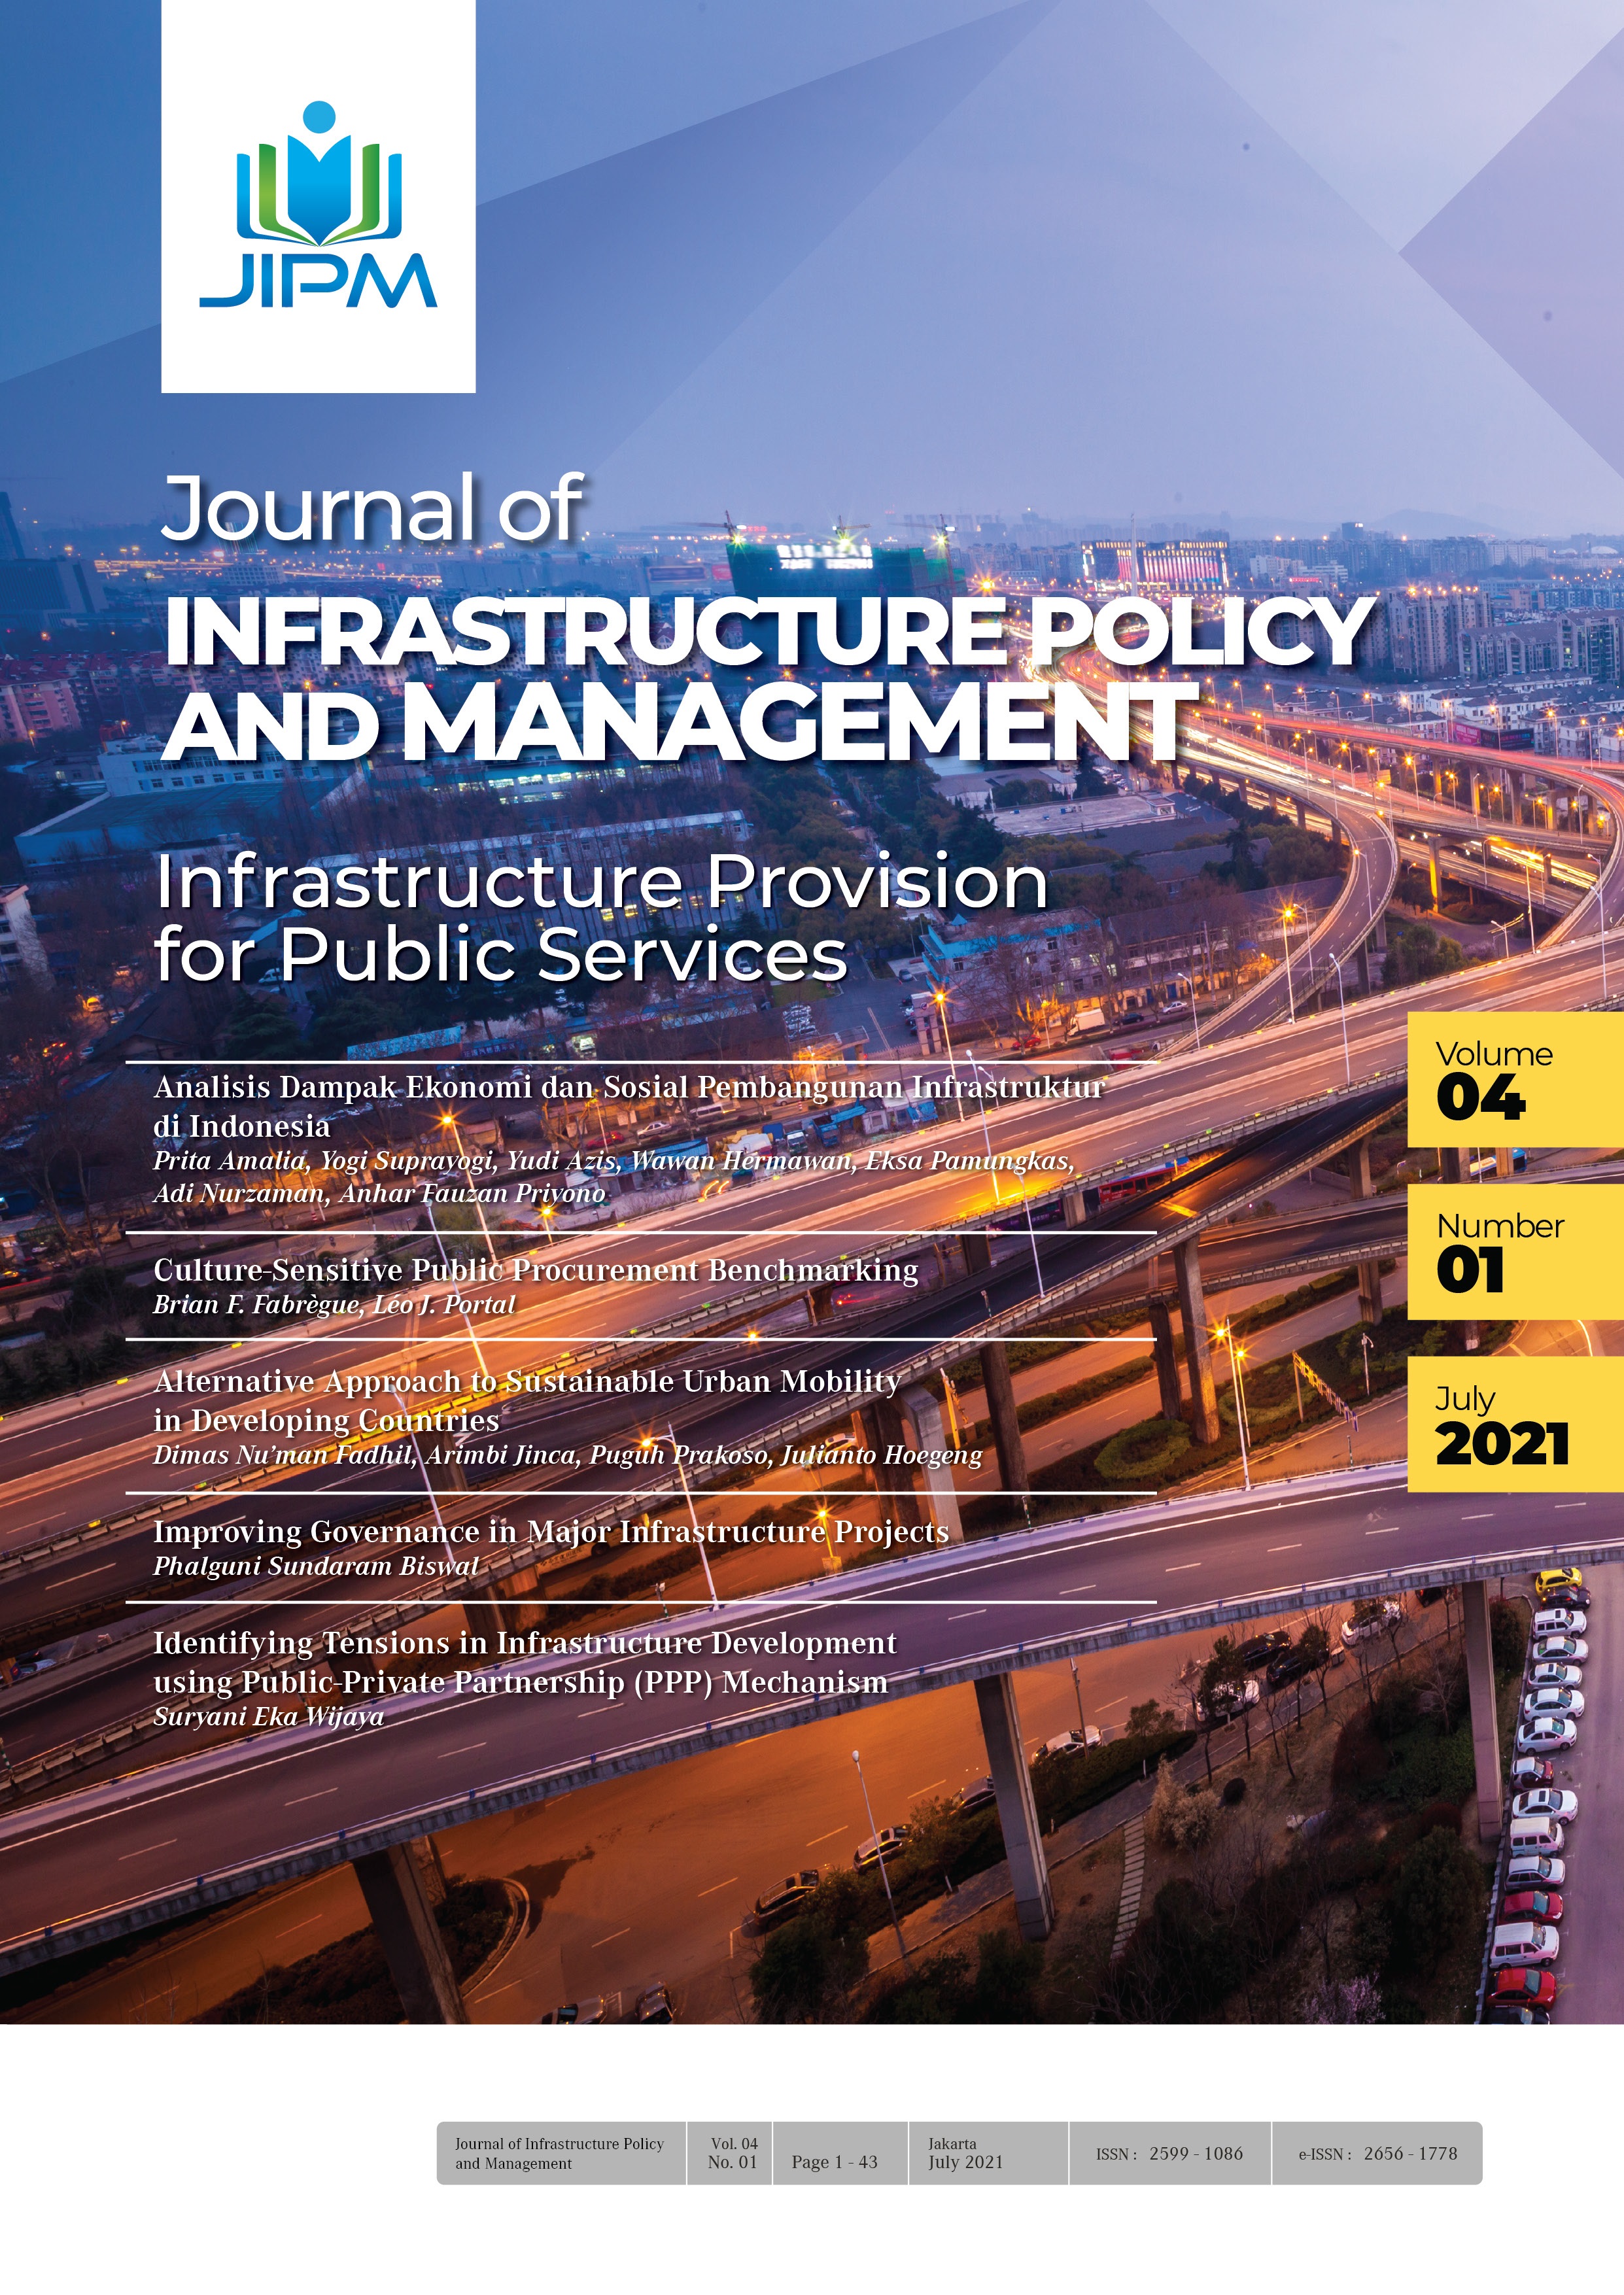 					View Vol. 4 No. 1 (2021): Journal of Infrastructure Policy and Management (JIPM)
				